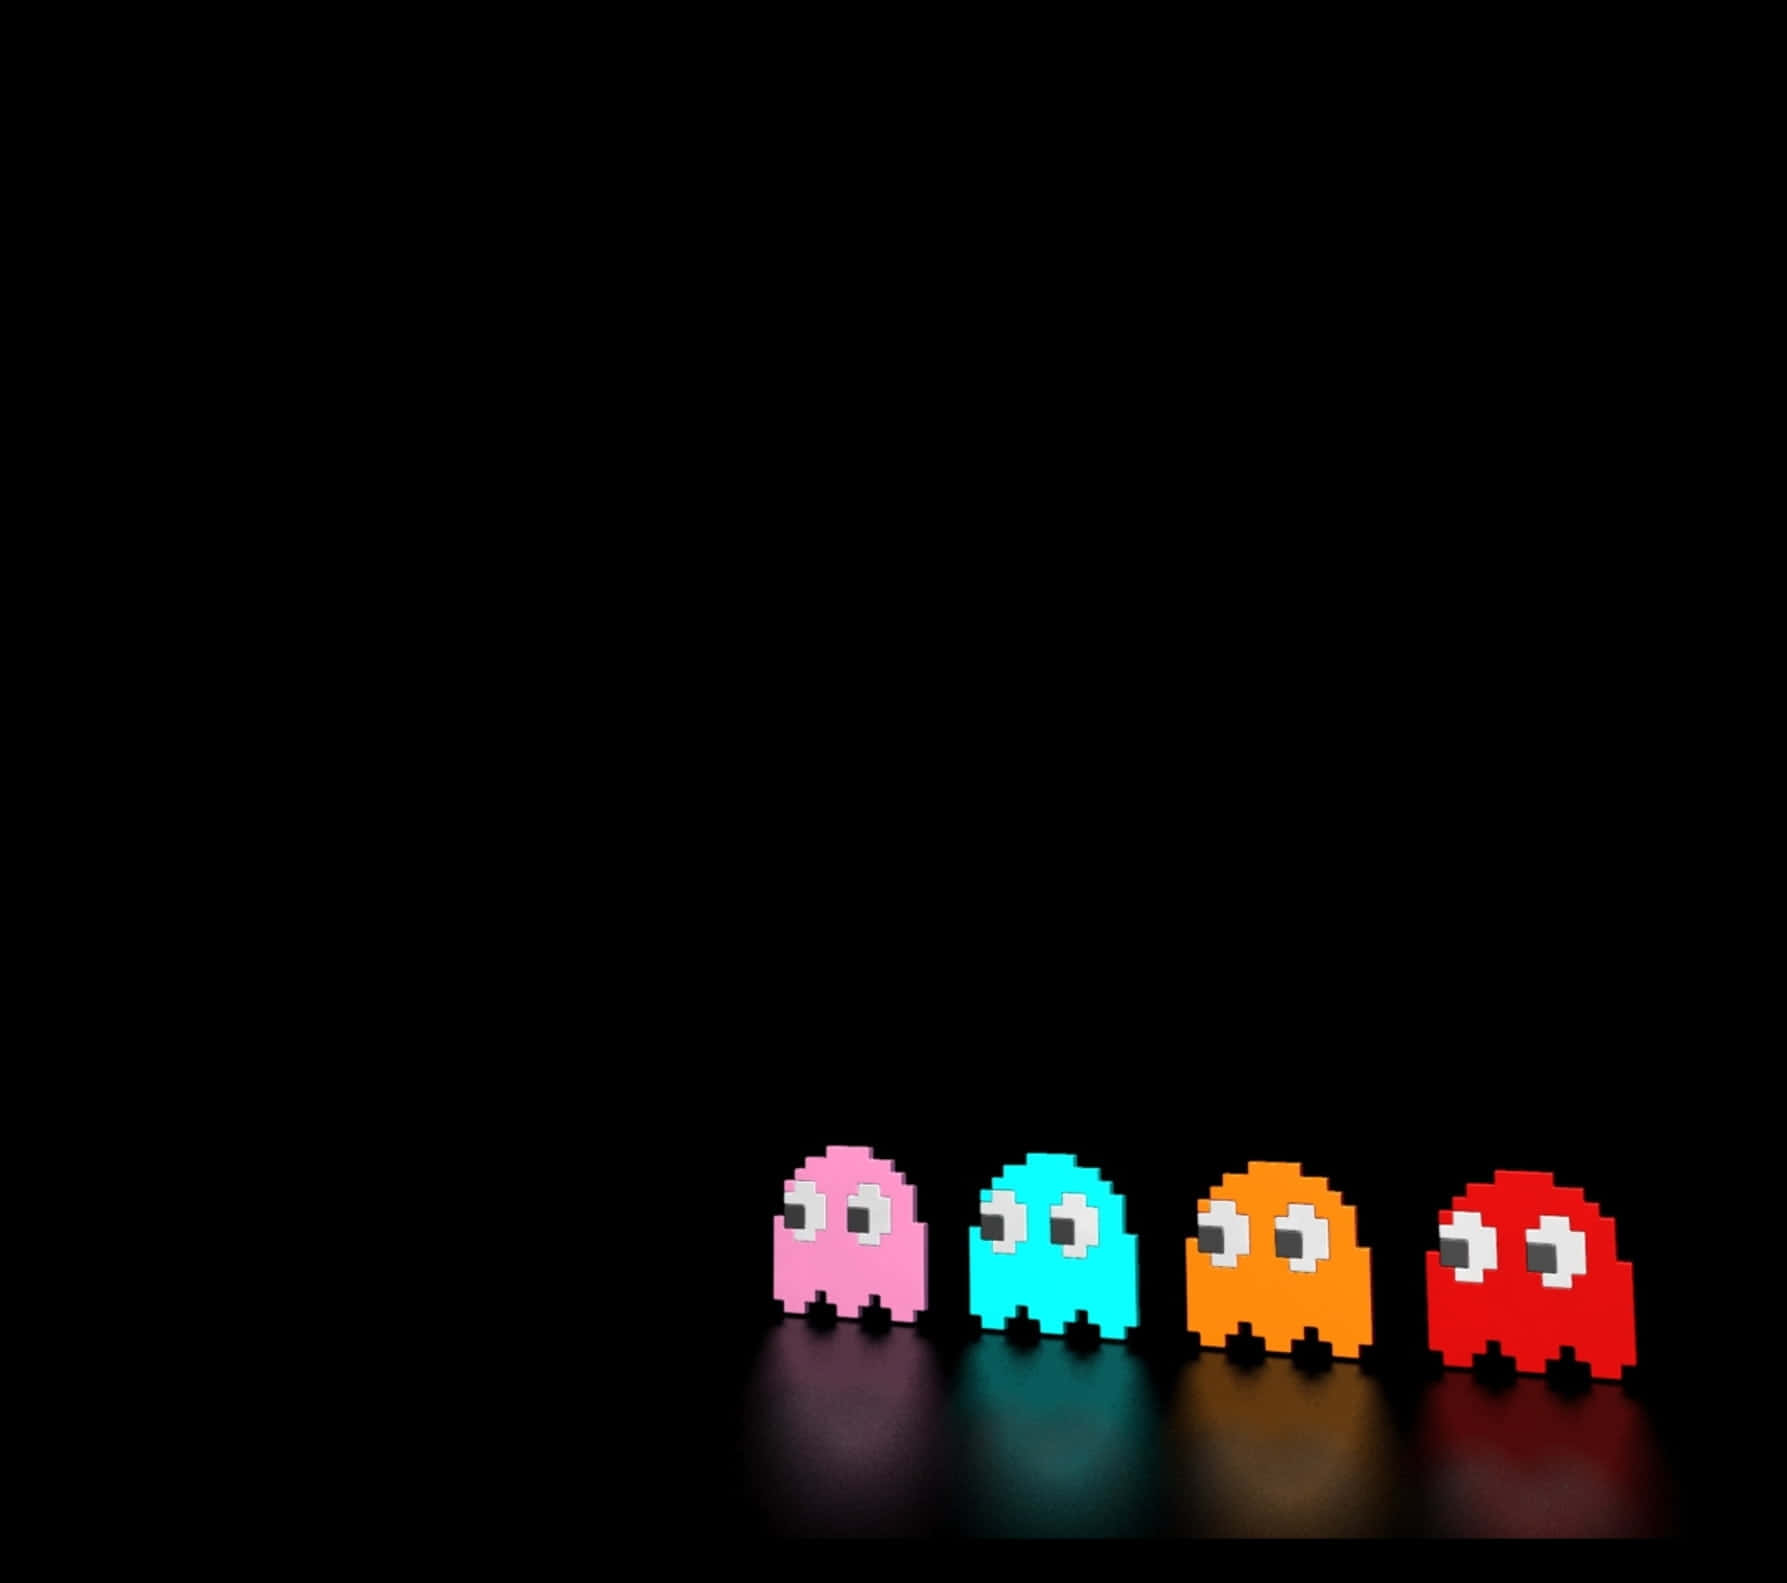 Retro Game Pac-man Ghosts Pixelated Wallpaper